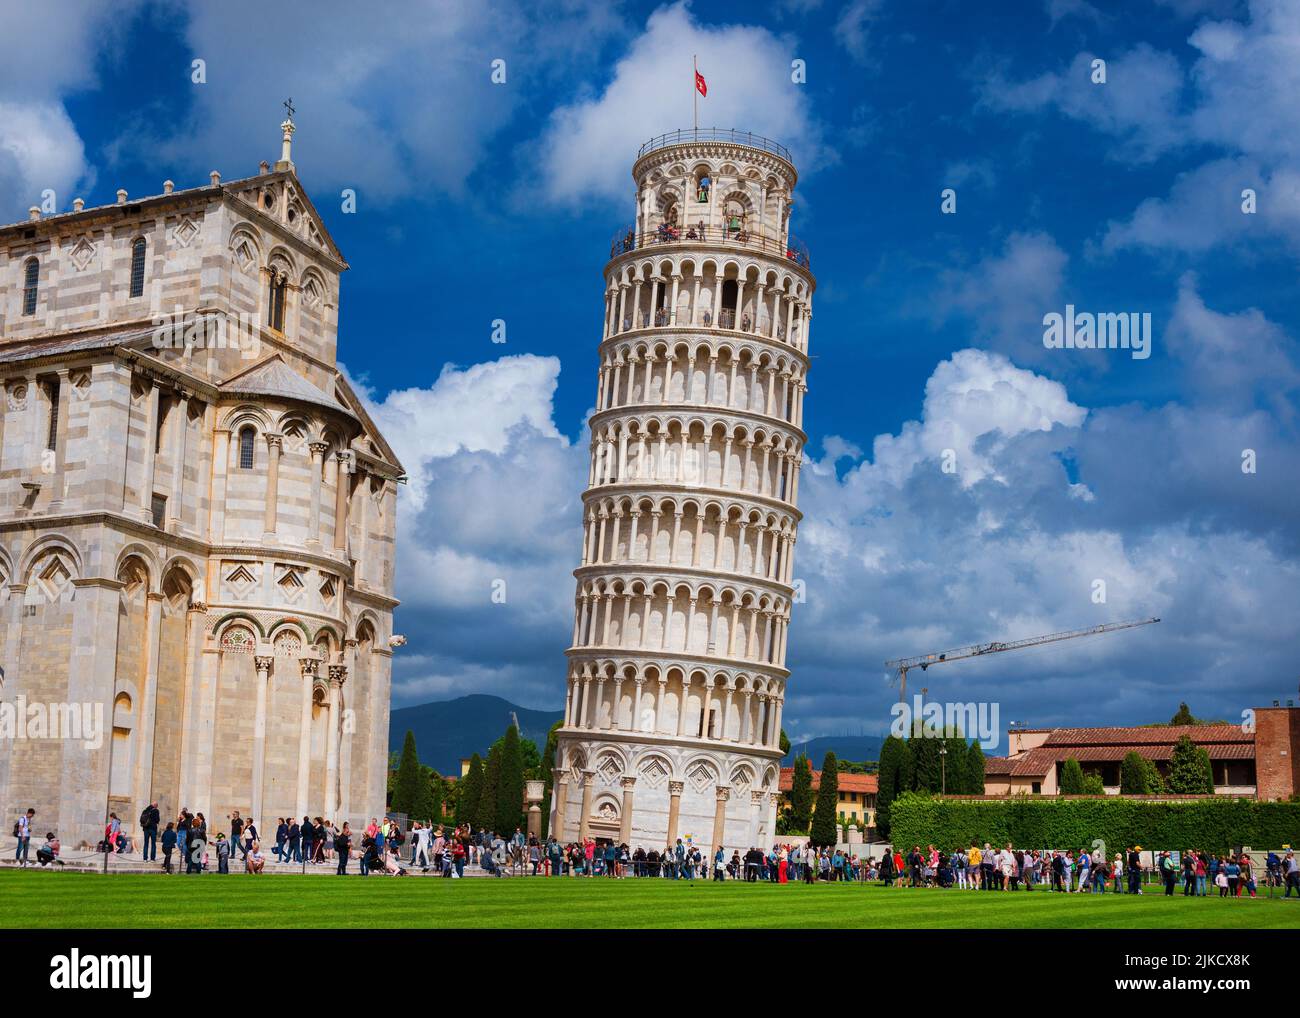 Tourists vist Campo dei Miracoli square with the iconic Leaning Tower of Pisa Stock Photo